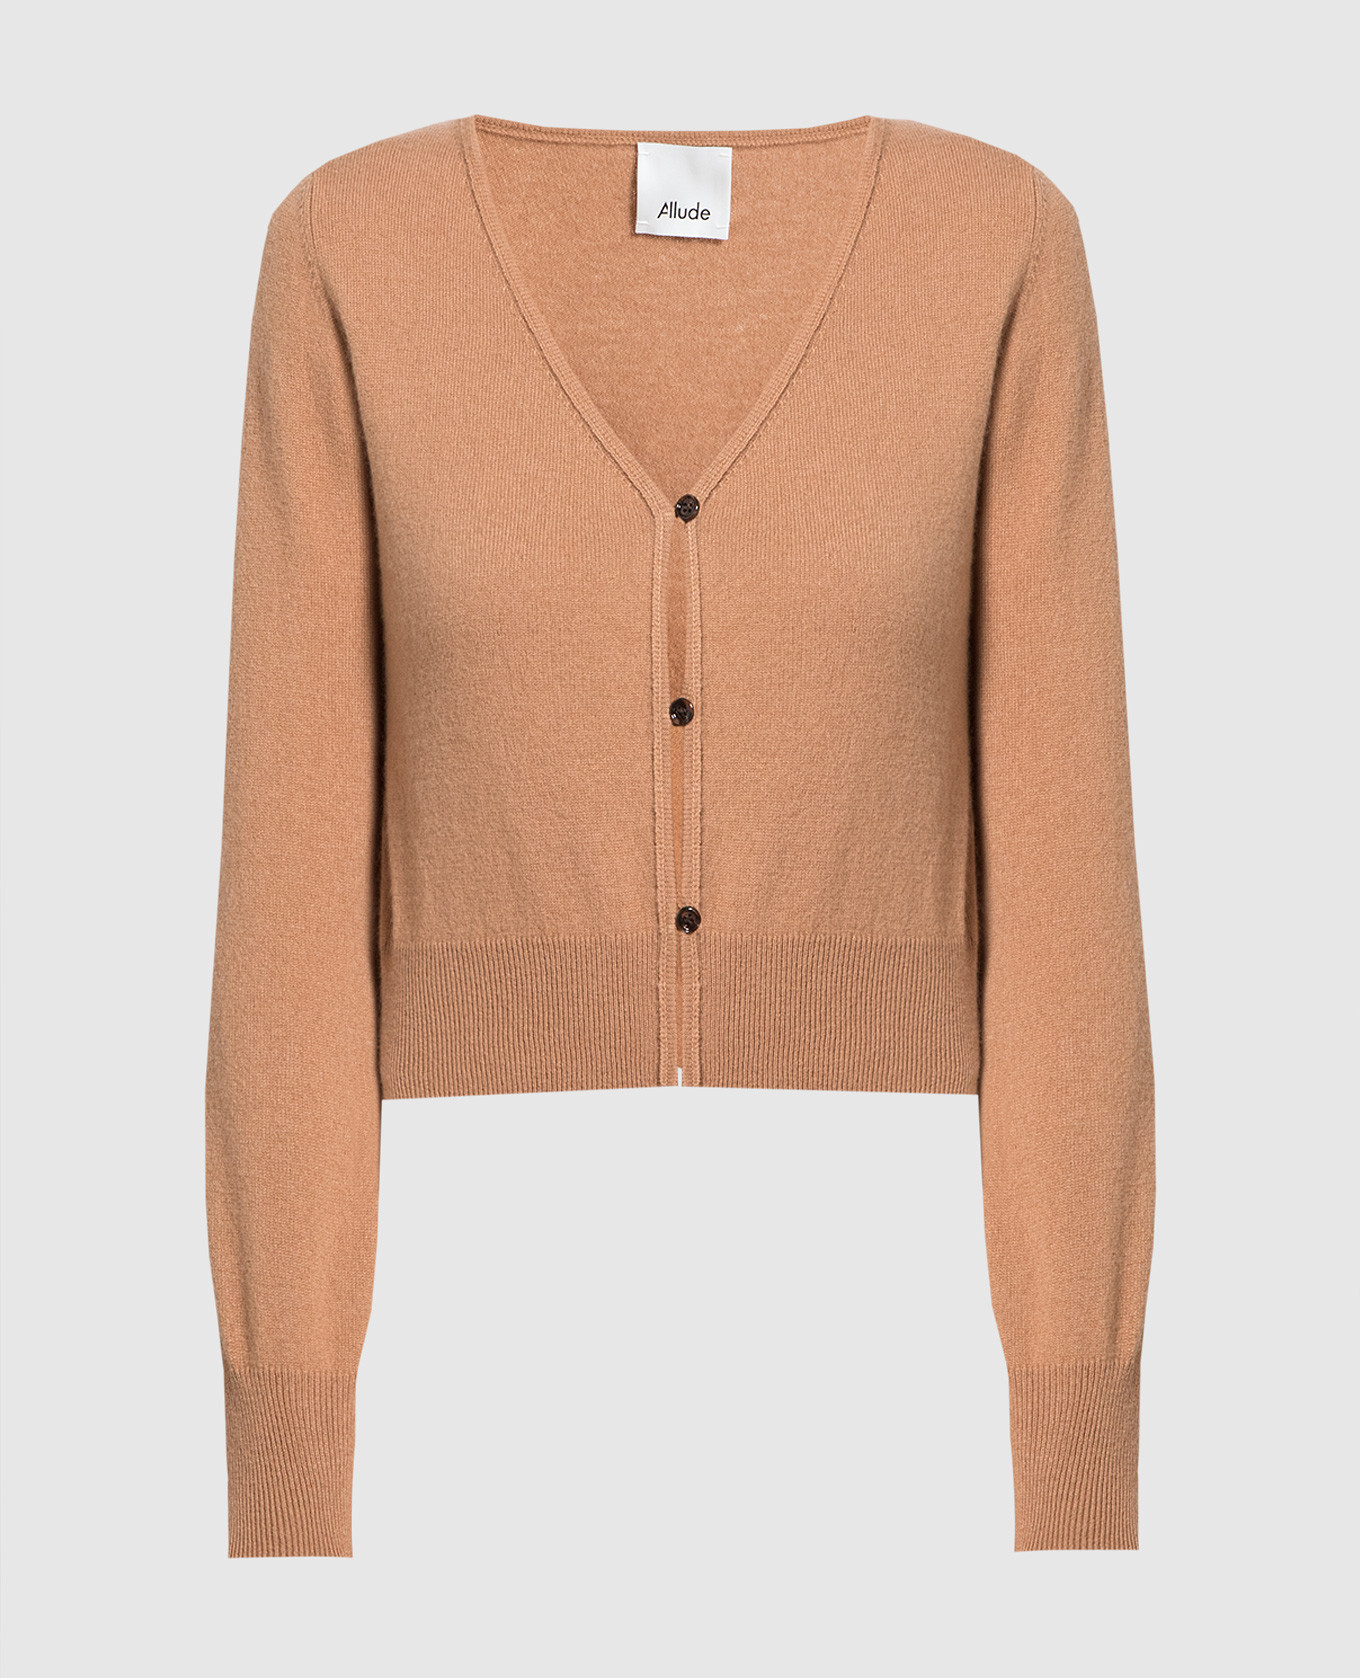 Brown wool and cashmere cardigan